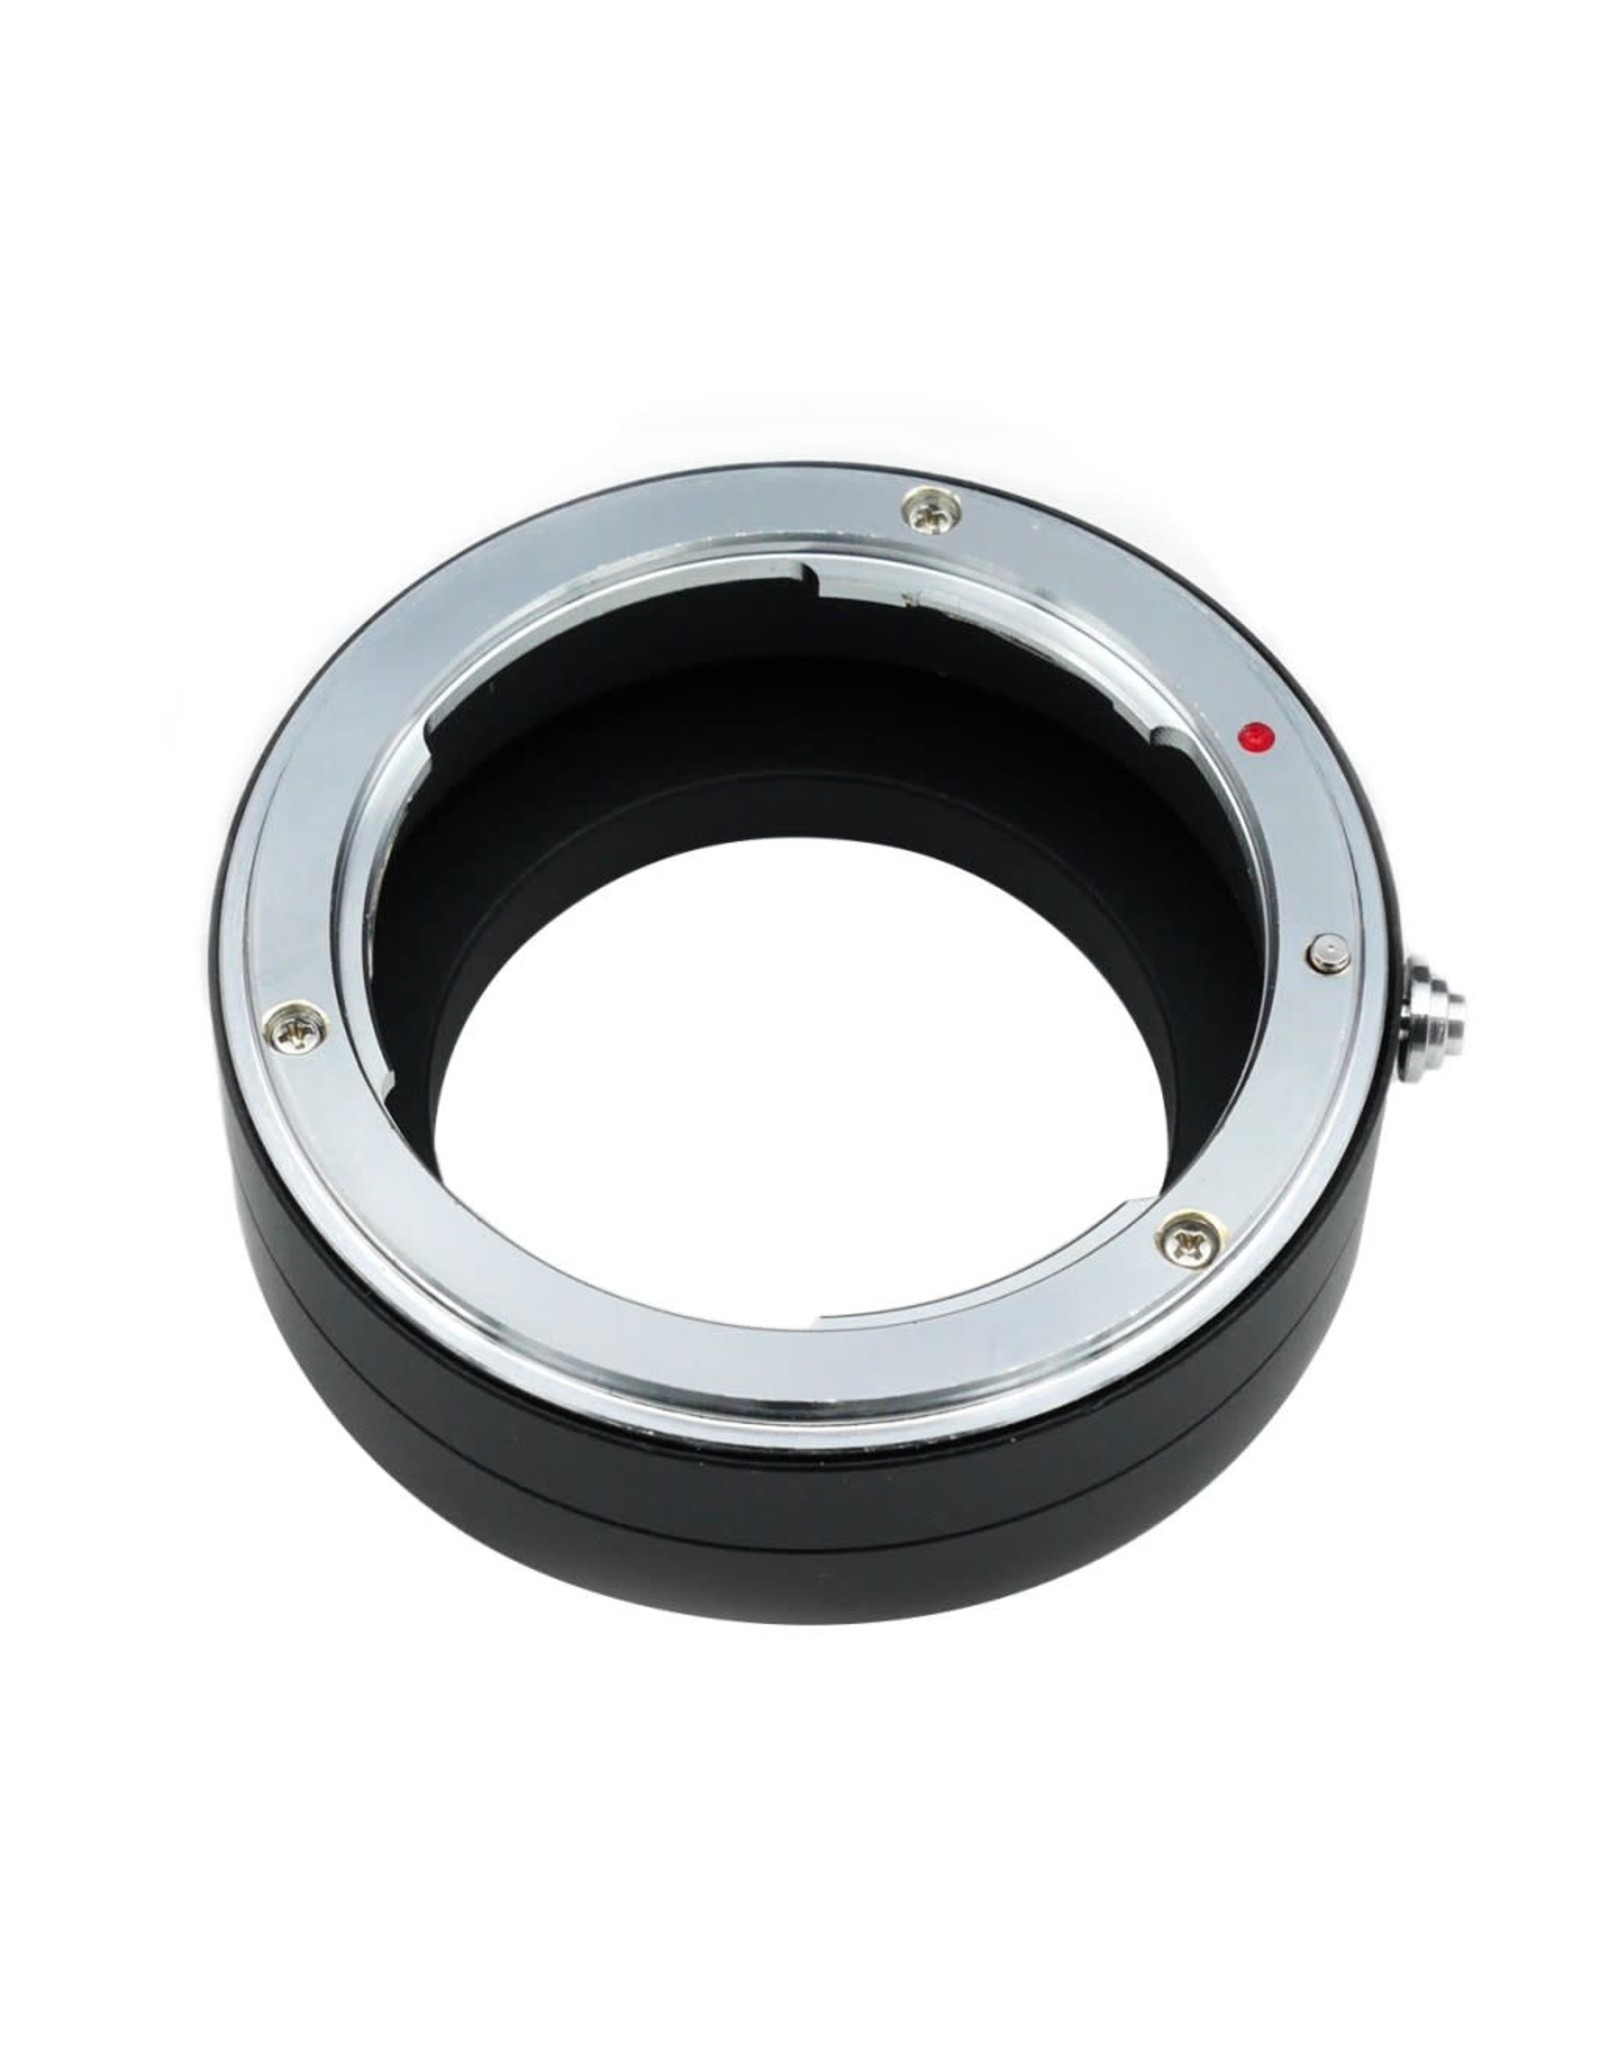 ZWO ZWO Nikon lens Adapter for EFW